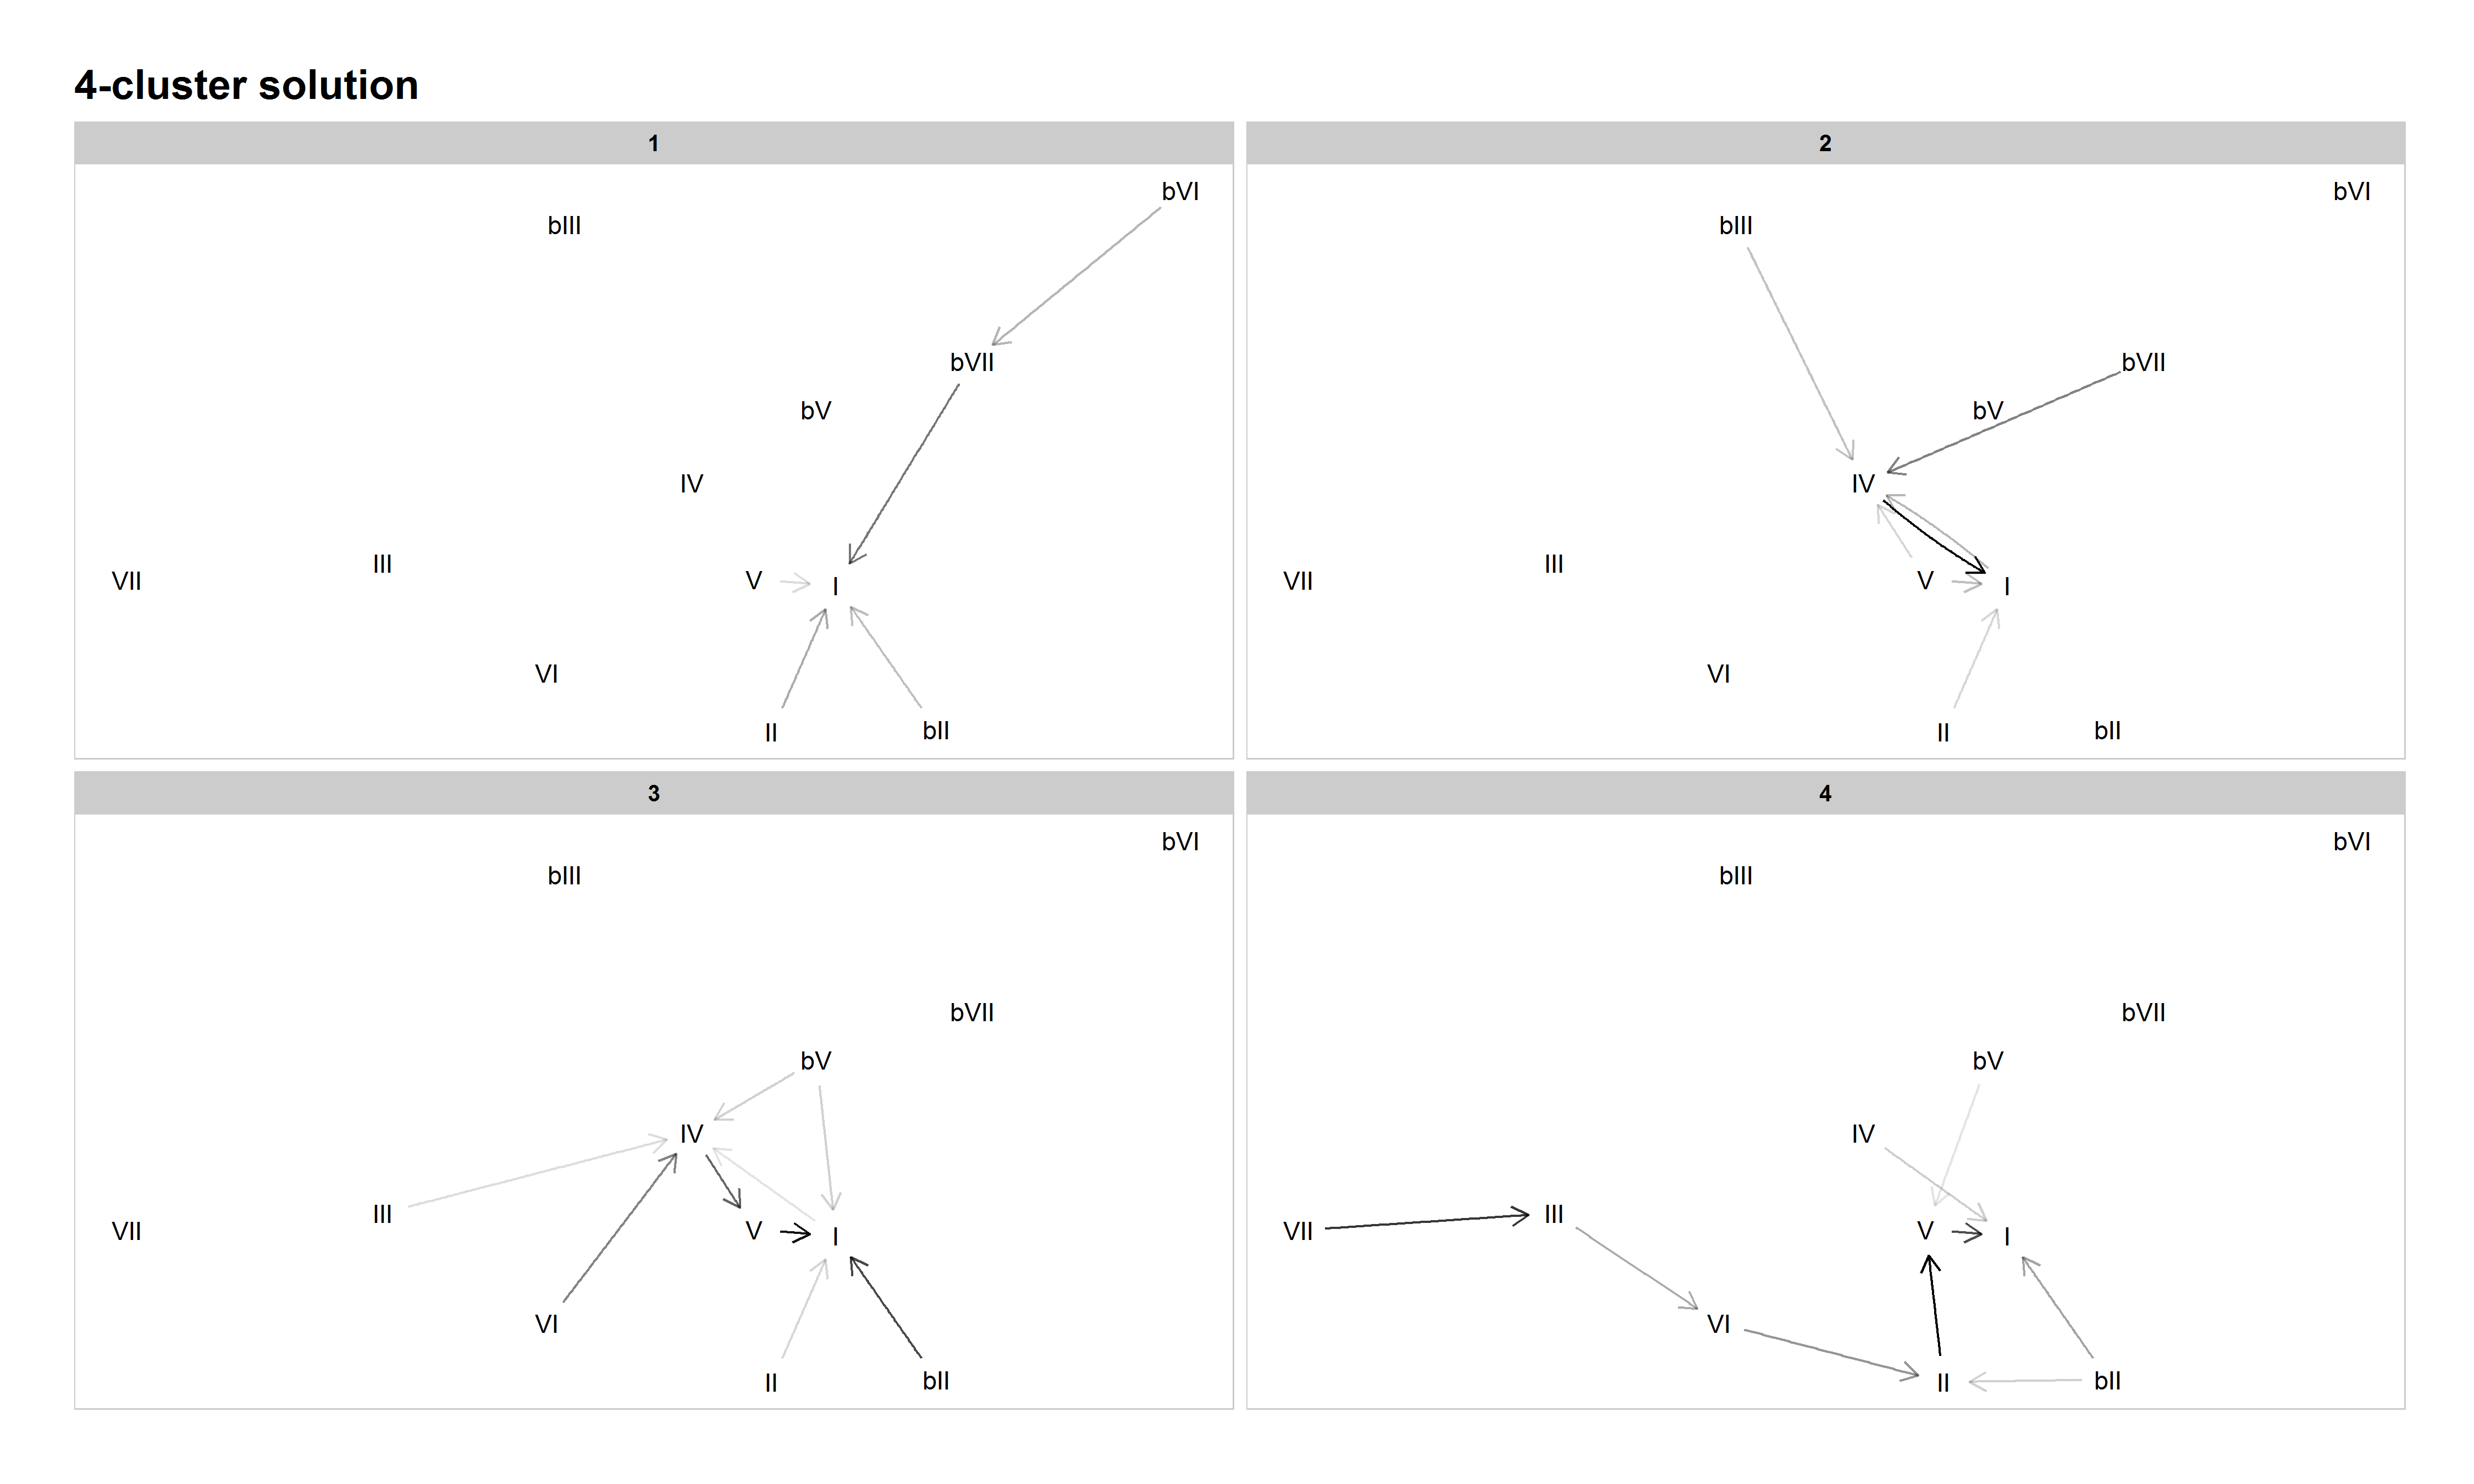 A network graph shows harmonic progressions among a 4-cluster solution based on their probability.